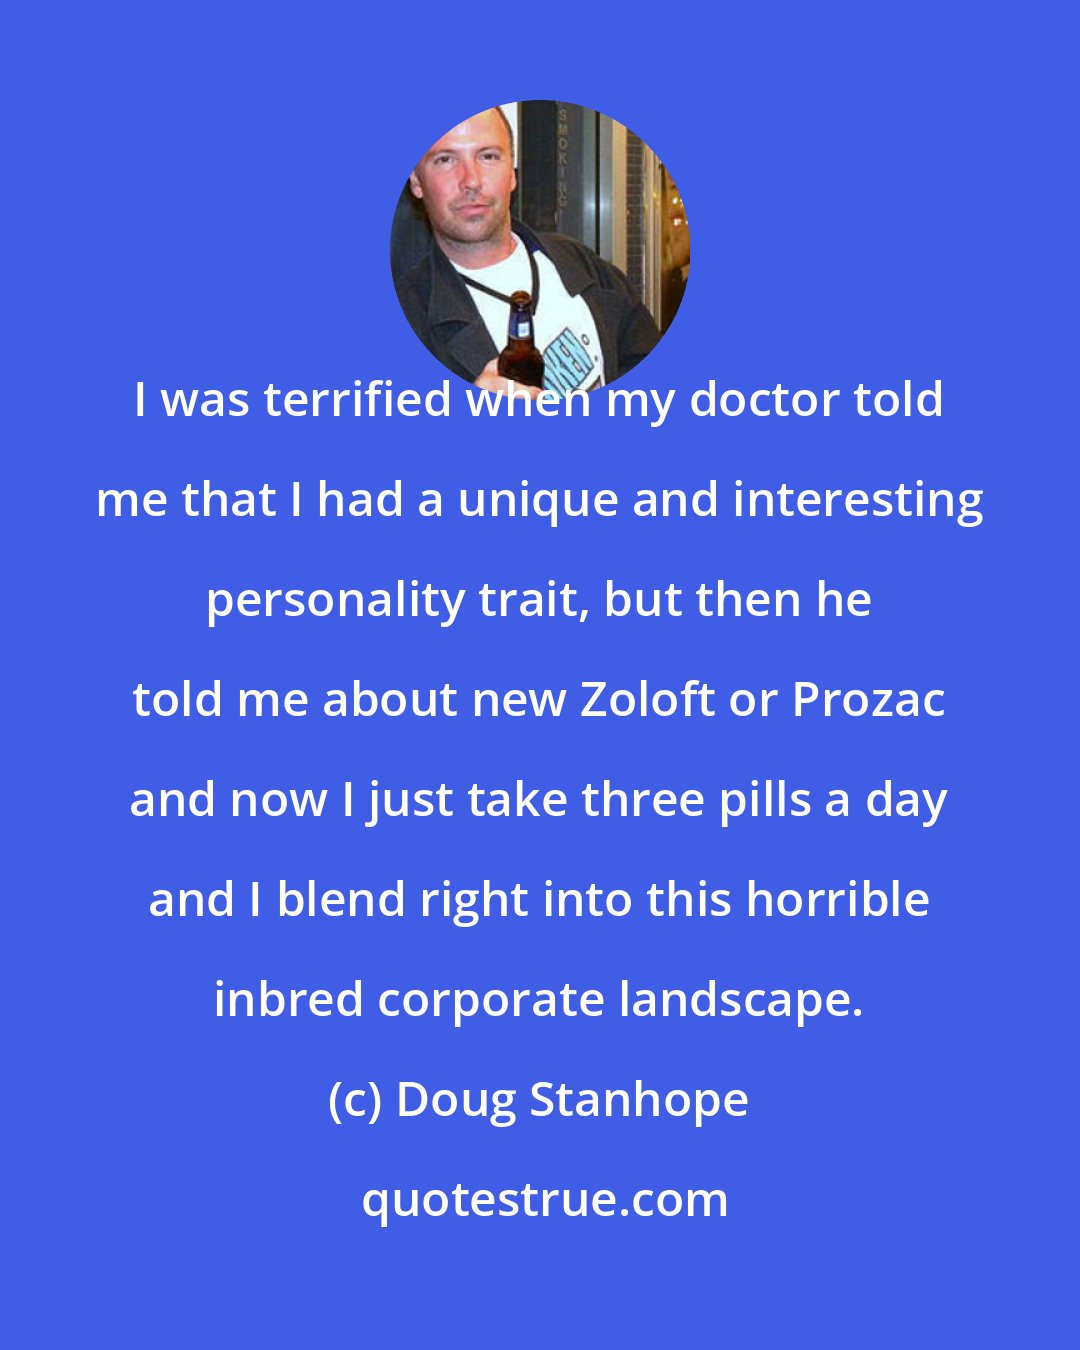 Doug Stanhope: I was terrified when my doctor told me that I had a unique and interesting personality trait, but then he told me about new Zoloft or Prozac and now I just take three pills a day and I blend right into this horrible inbred corporate landscape.